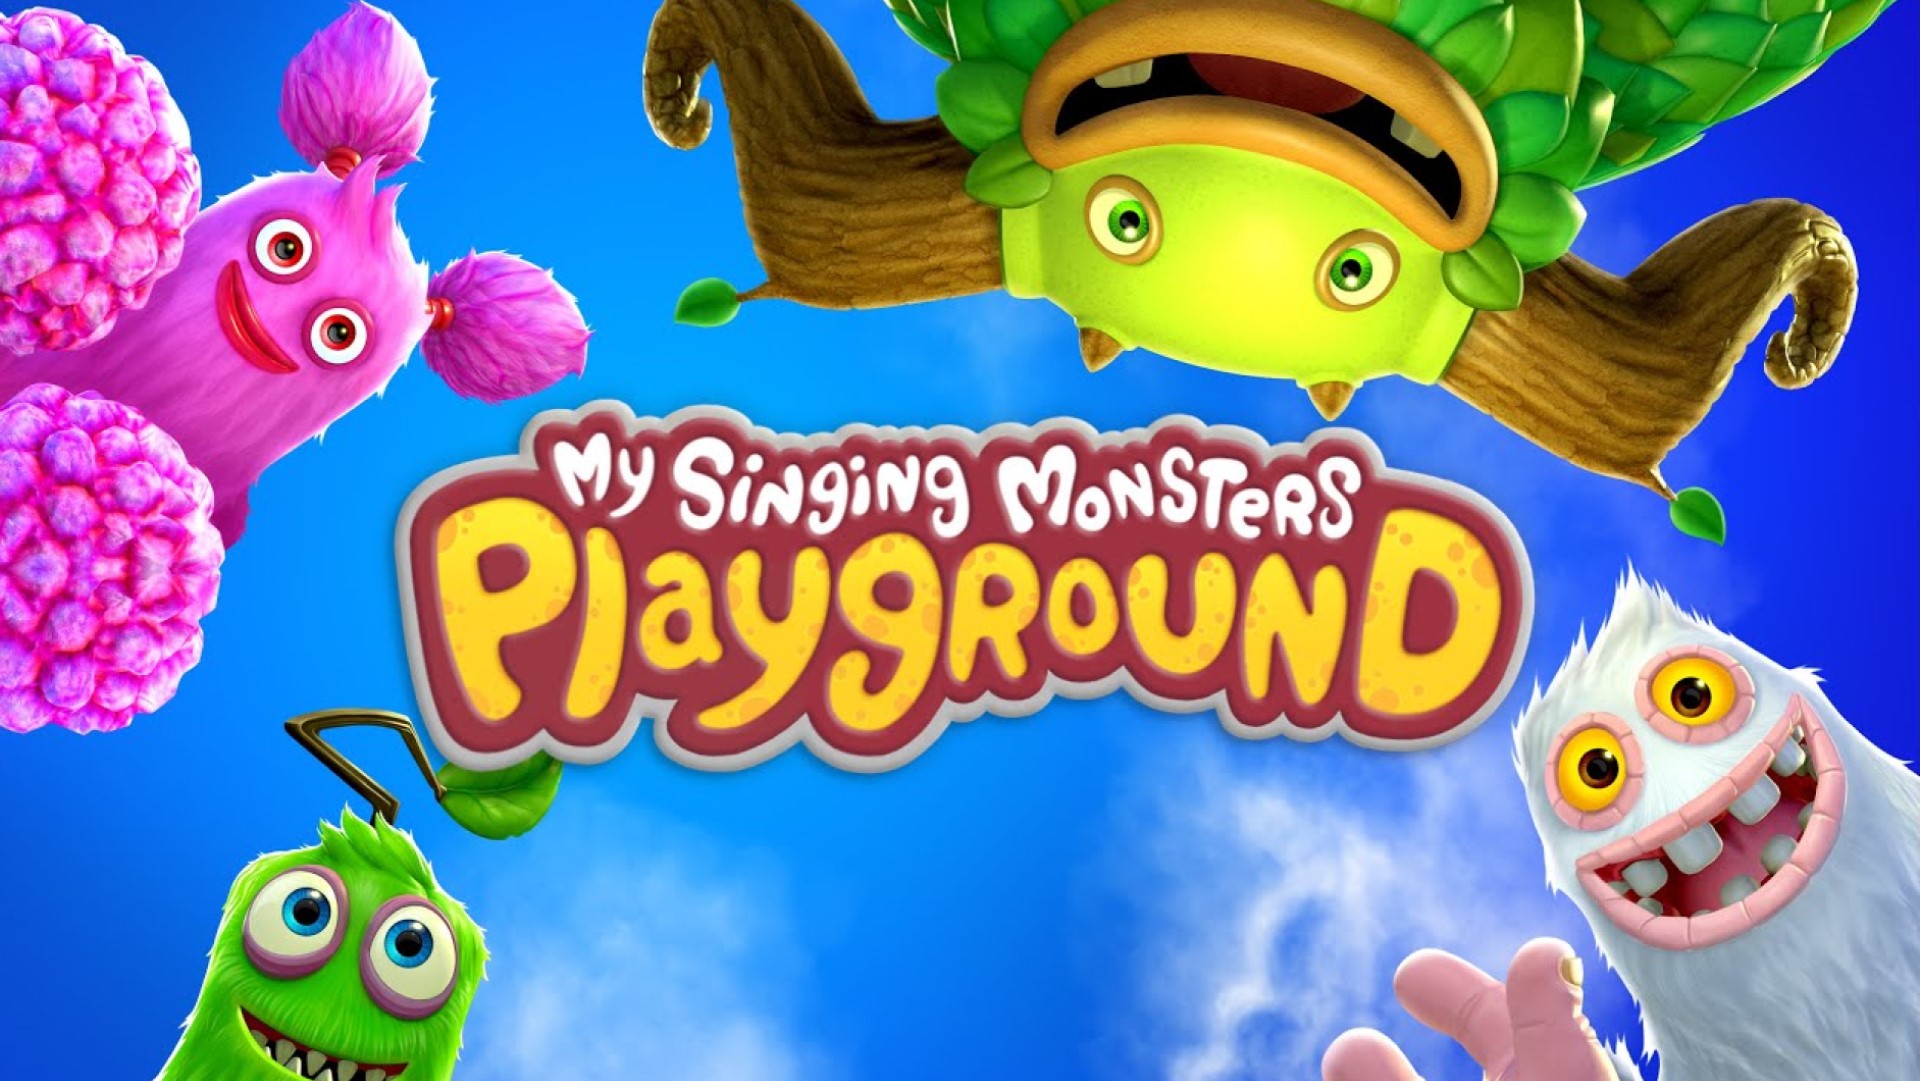 My Singing Monsters Playground Interview – Games, Development, and More